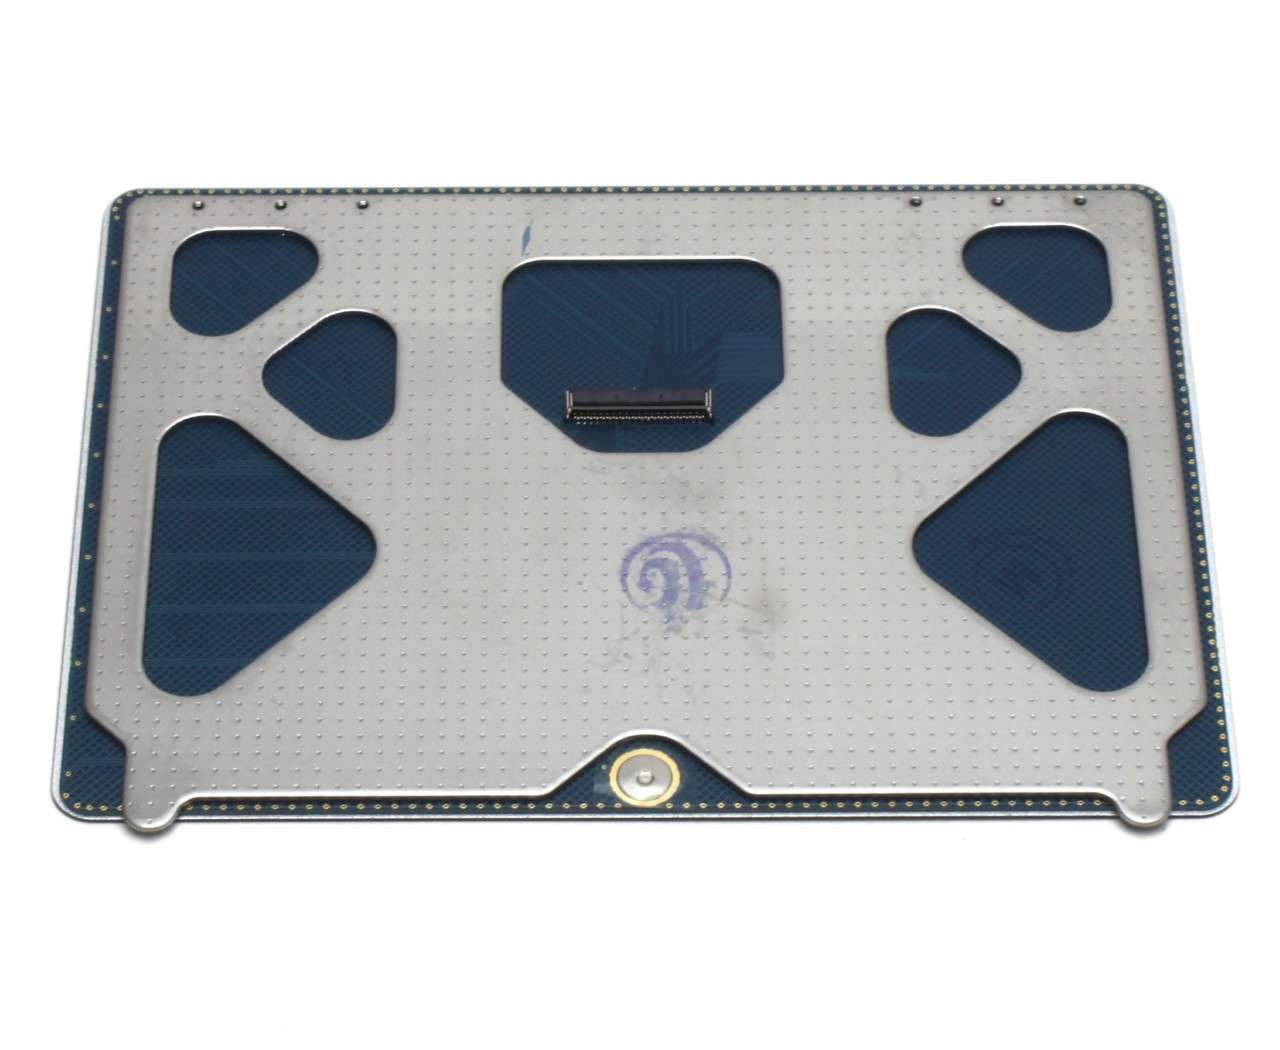 Touchpad Apple Macbook Pro Unibody 13 A1278 Mid 2012 Trackpad